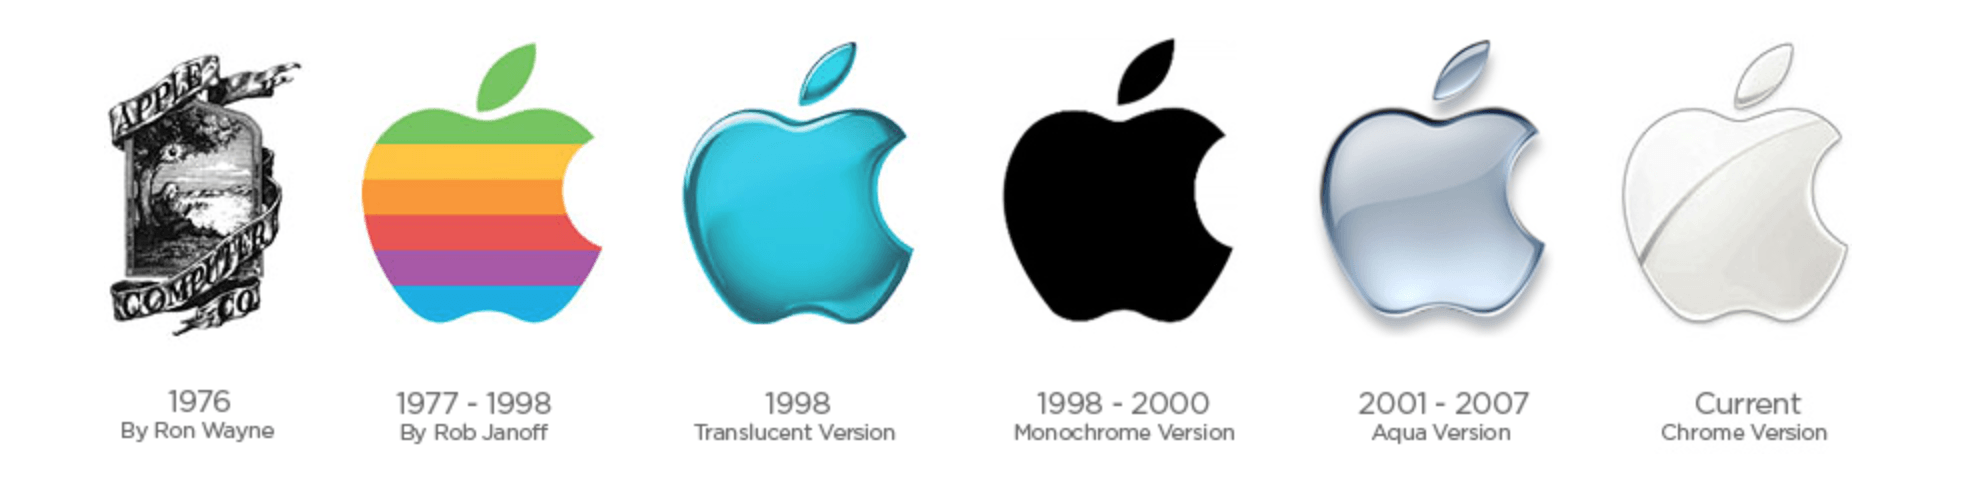 Famous Translucent Logo - What Makes a World Famous Logo? - Colleen Keith Design